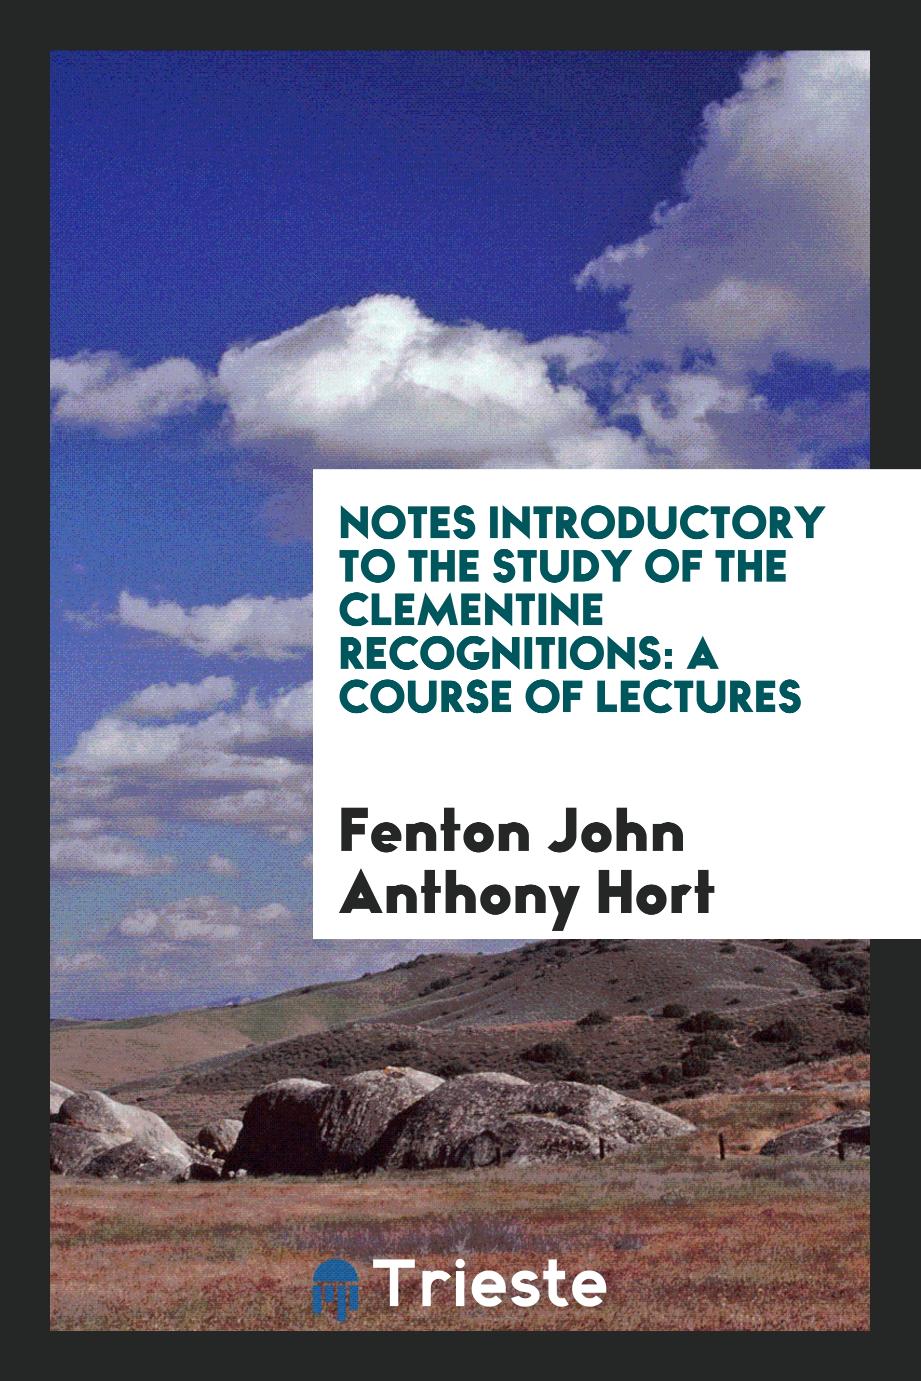 Notes Introductory to the Study of the Clementine Recognitions: A Course of Lectures